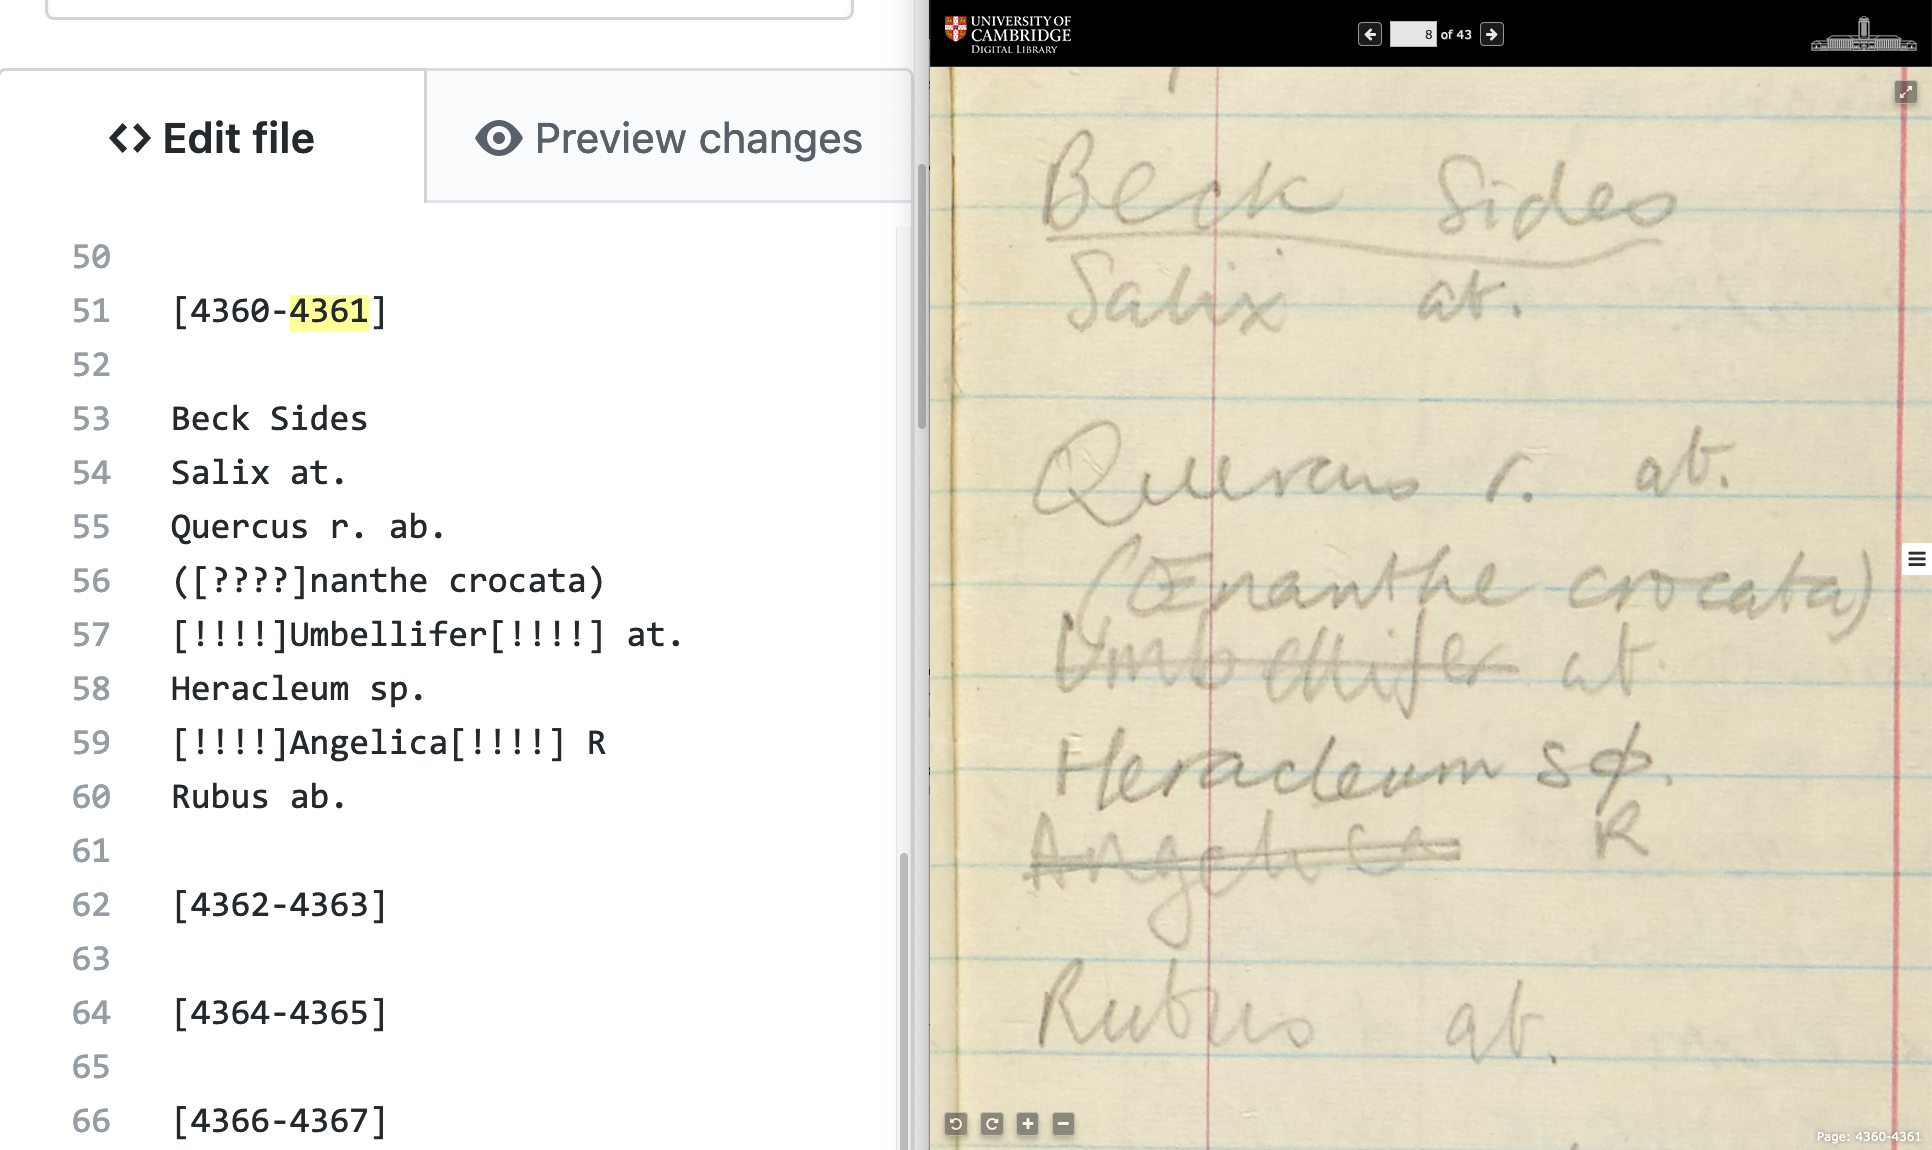 Screengrab showing examples of transcribing illegible and deleted text